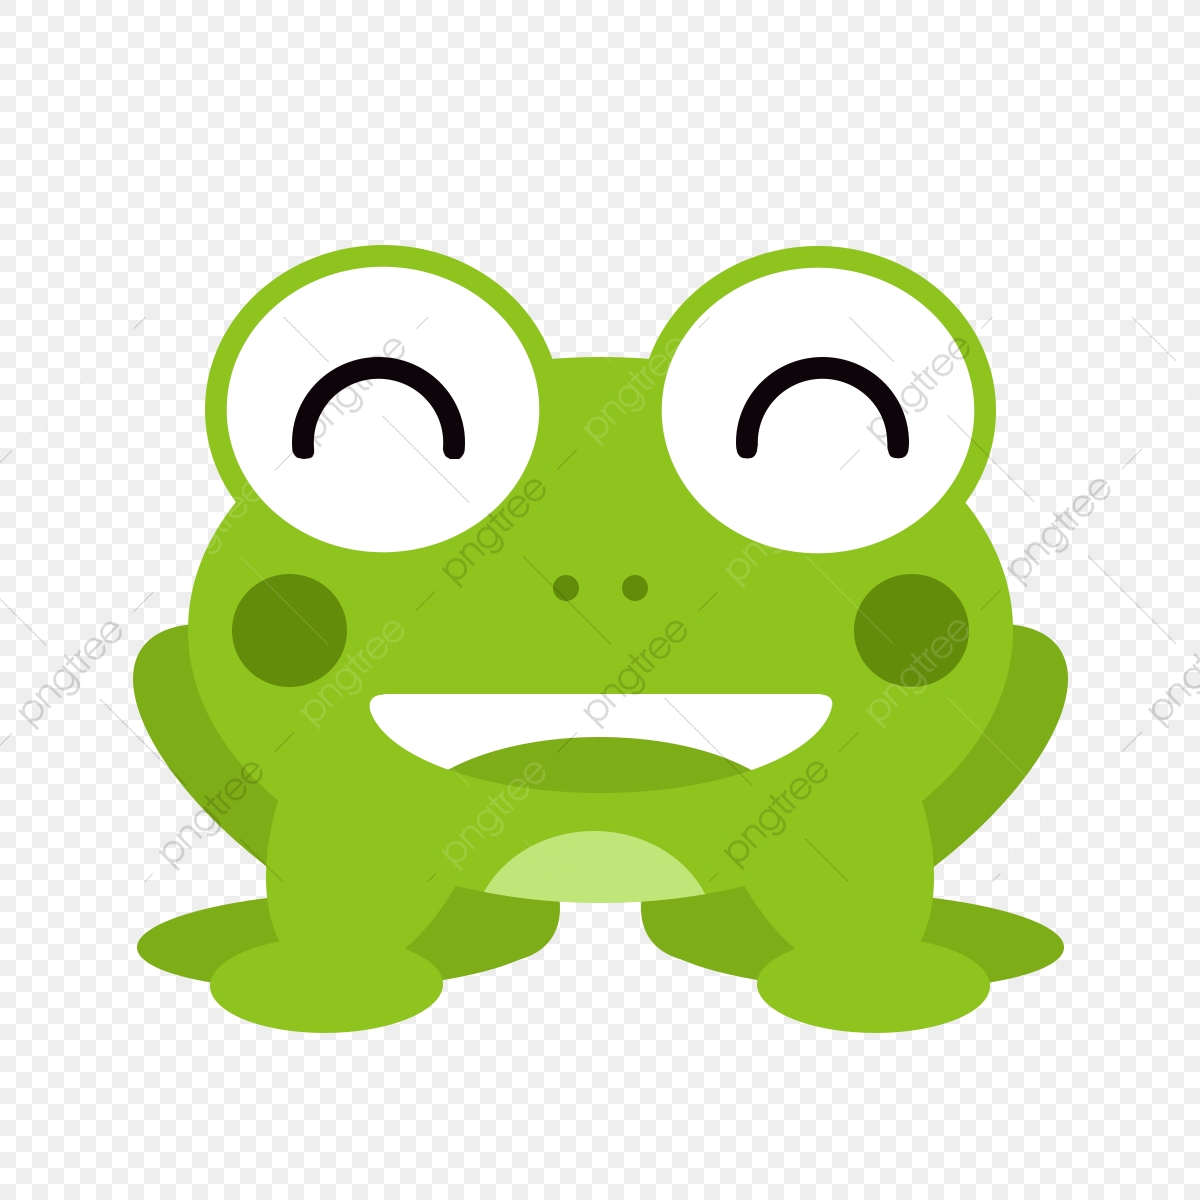 clipart frog file